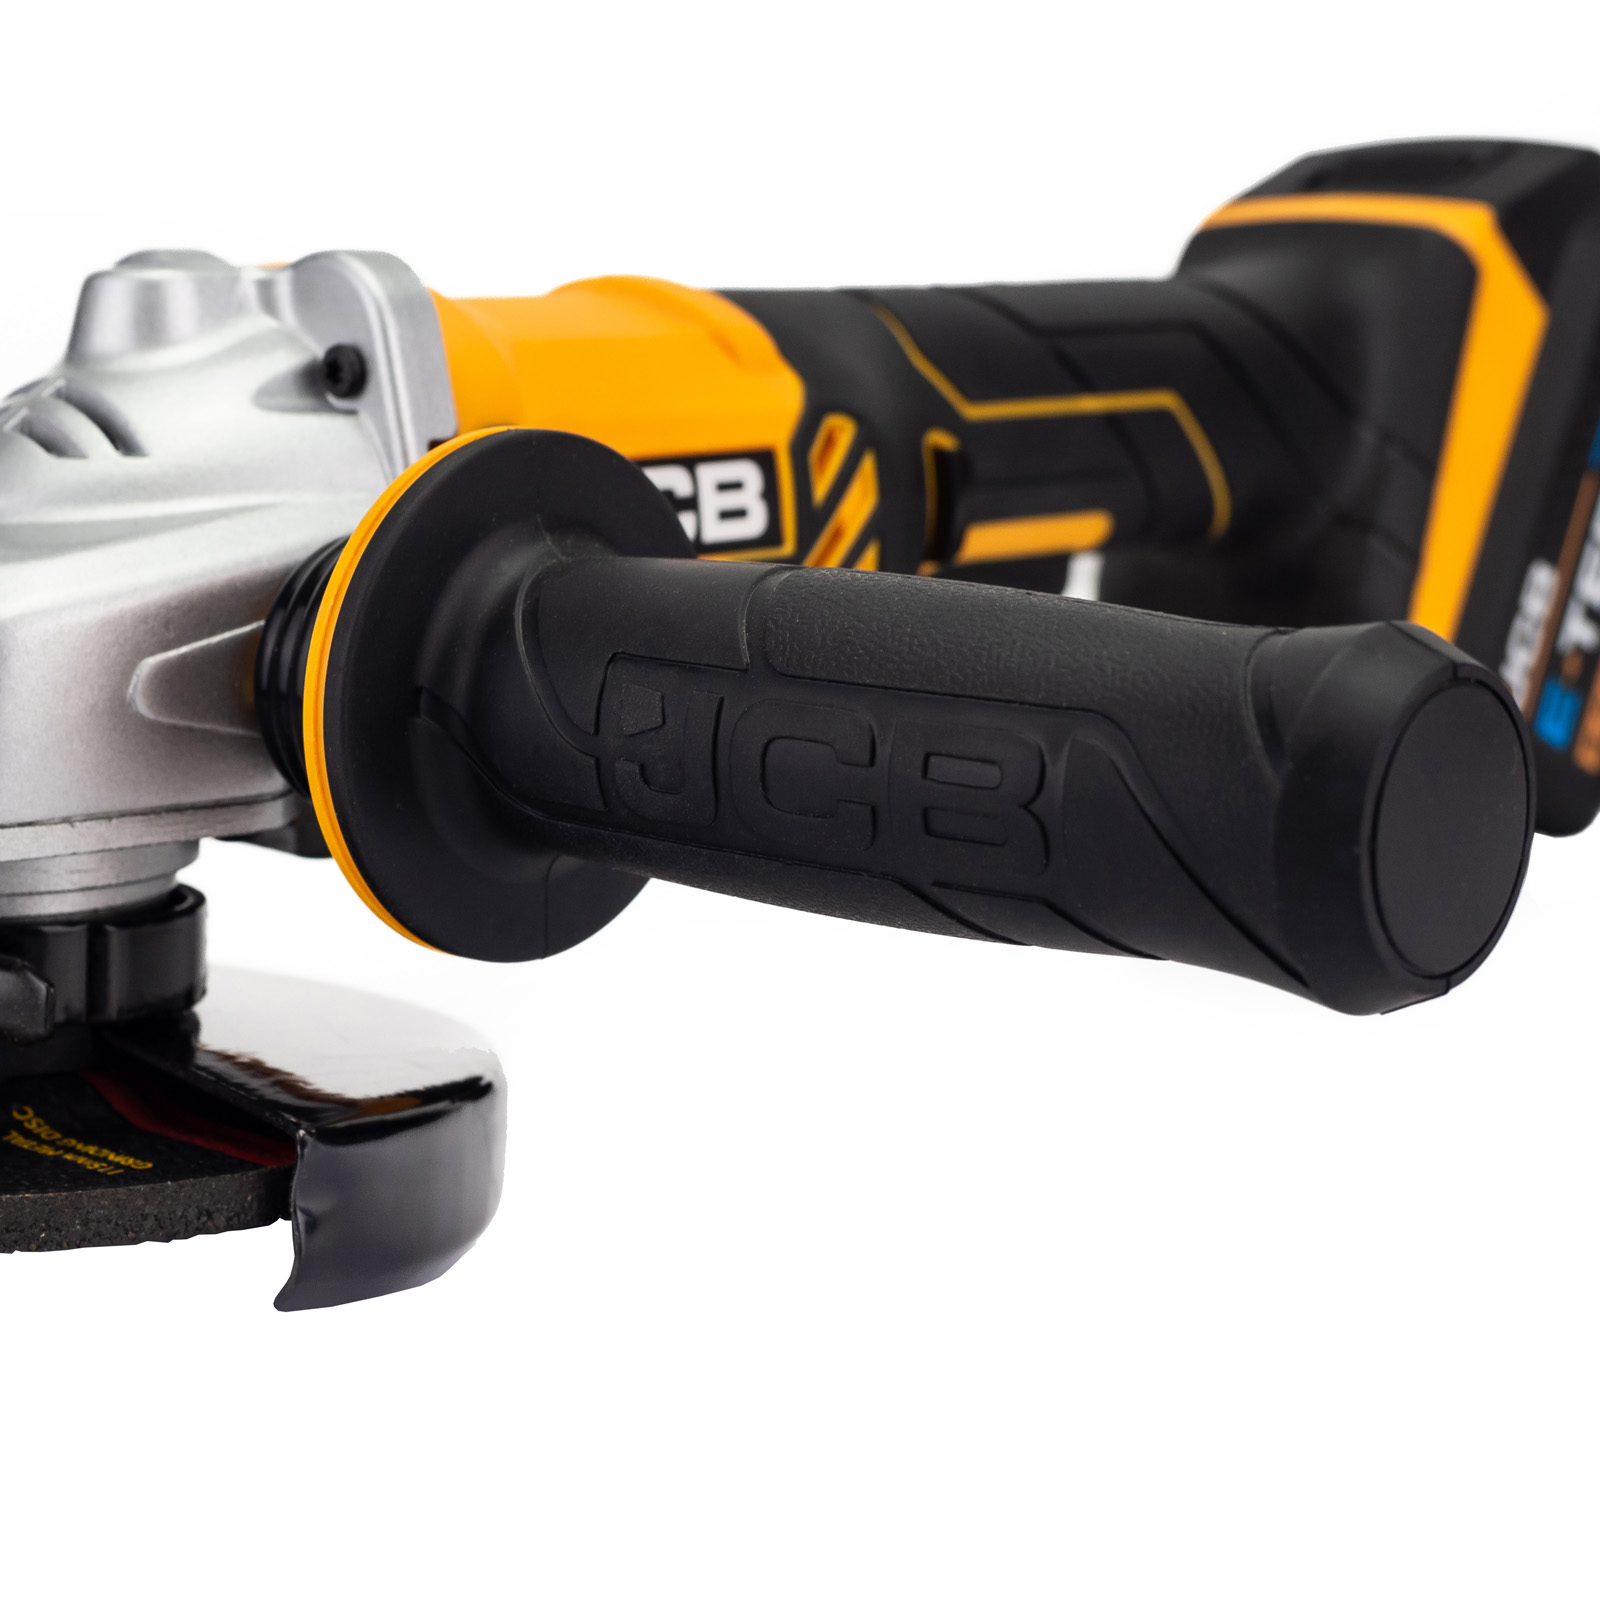 JCB 18V Combi Drill Angle Grinder Kit 2x 2.0ah Lithium-Ion Batteries and  charger in 20